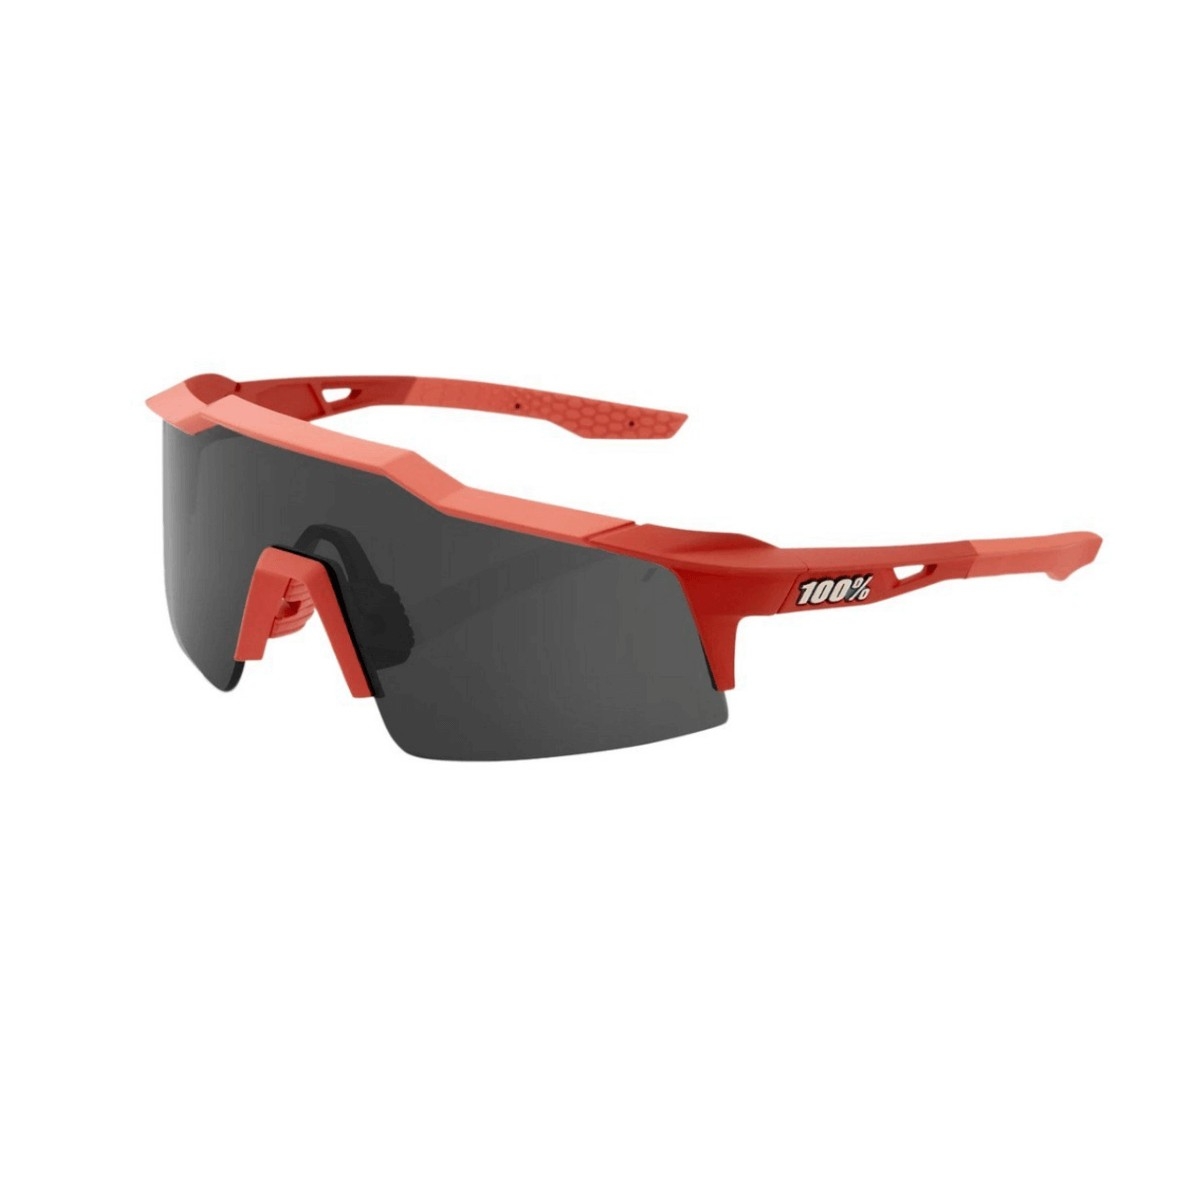 Occhiali 100% Speedcraft Xs Soft Tact Coral Smoke Lens + Clear Lens 